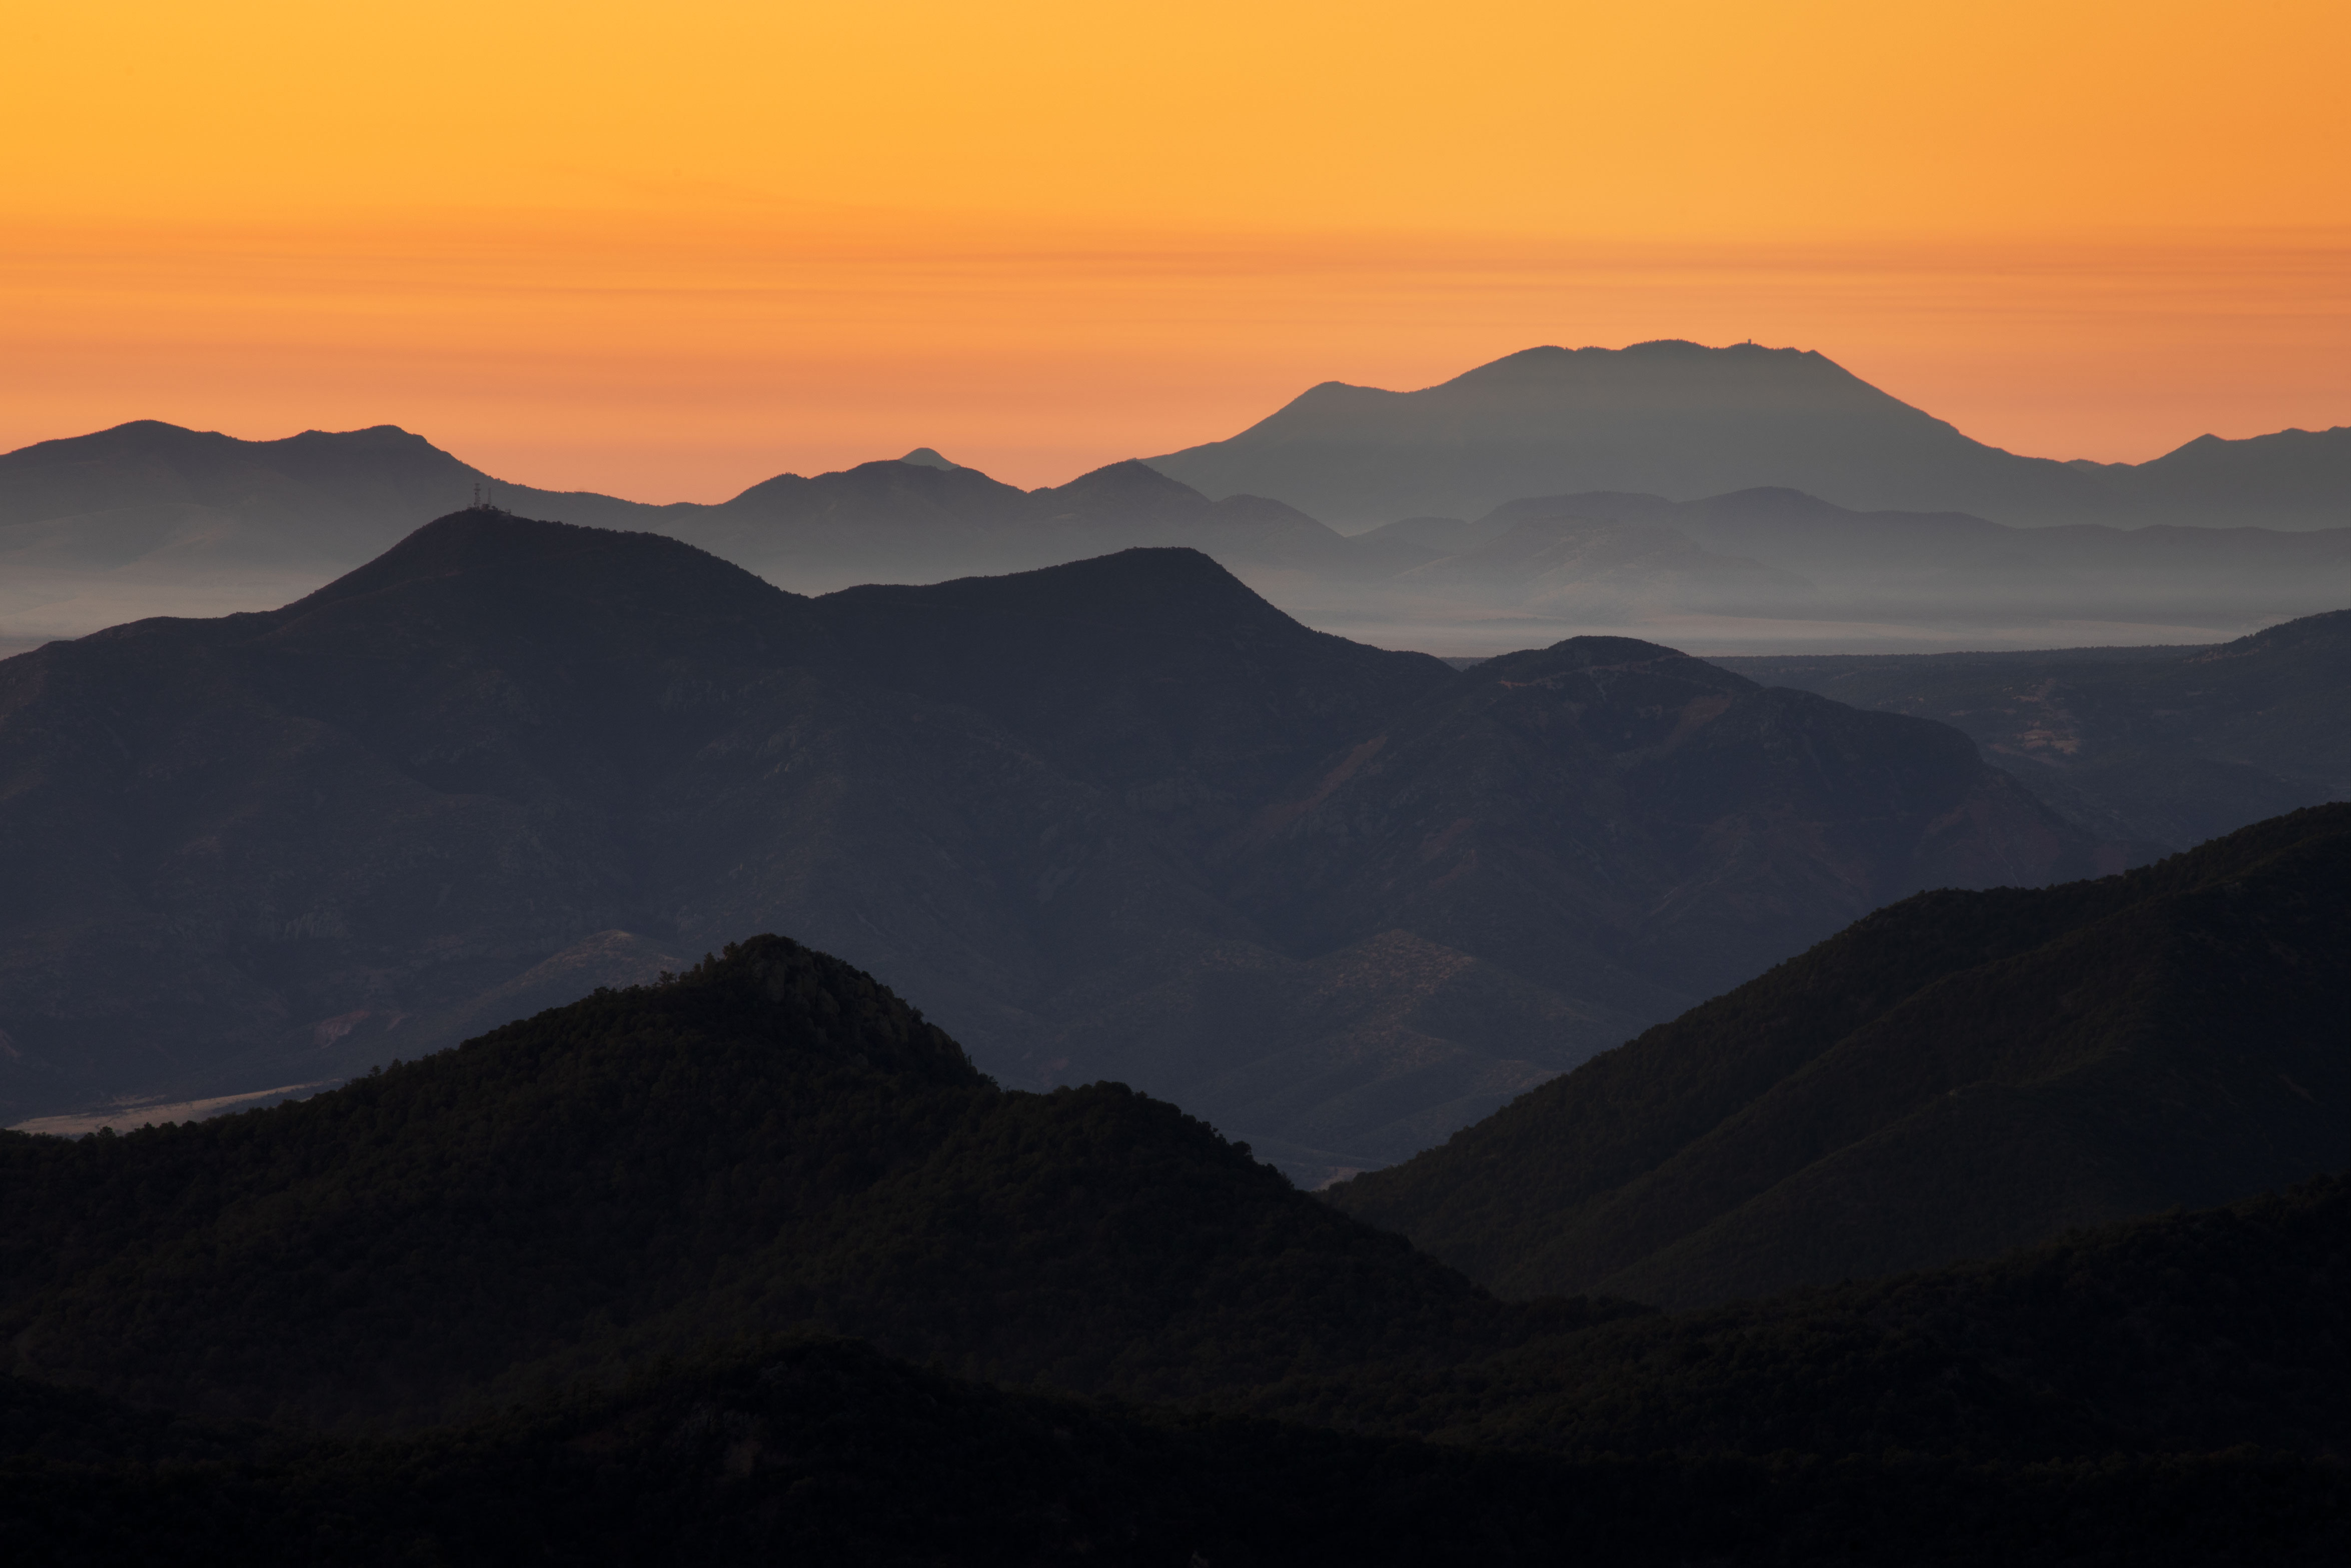 From high in the Santa Rita Mts. looking southeast toward other southern Arizona ranges (49 minutes after sunrise).